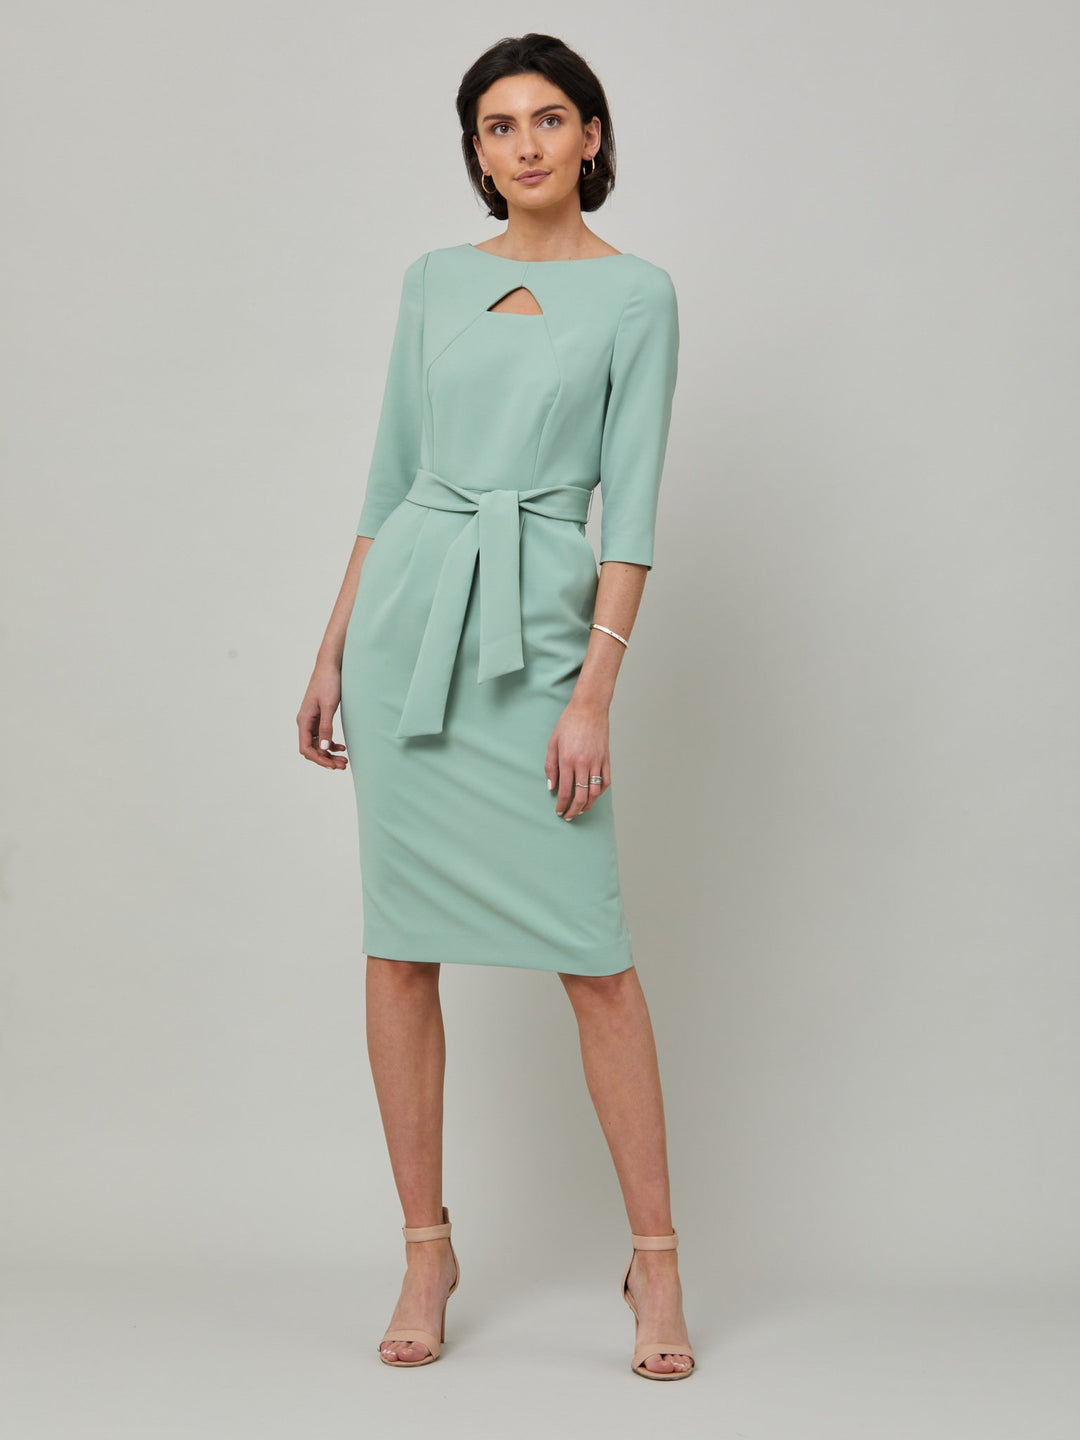 Beatrice is a fresh take on one of our key silhouettes. Features a statement diamond shape cut-out, belt and handy pockets. Crafted in our signature double crepe with a hint of stretch in willow green. Attending a summer wedding? Mother of the bride? Heading to the races? This is the dress for you.